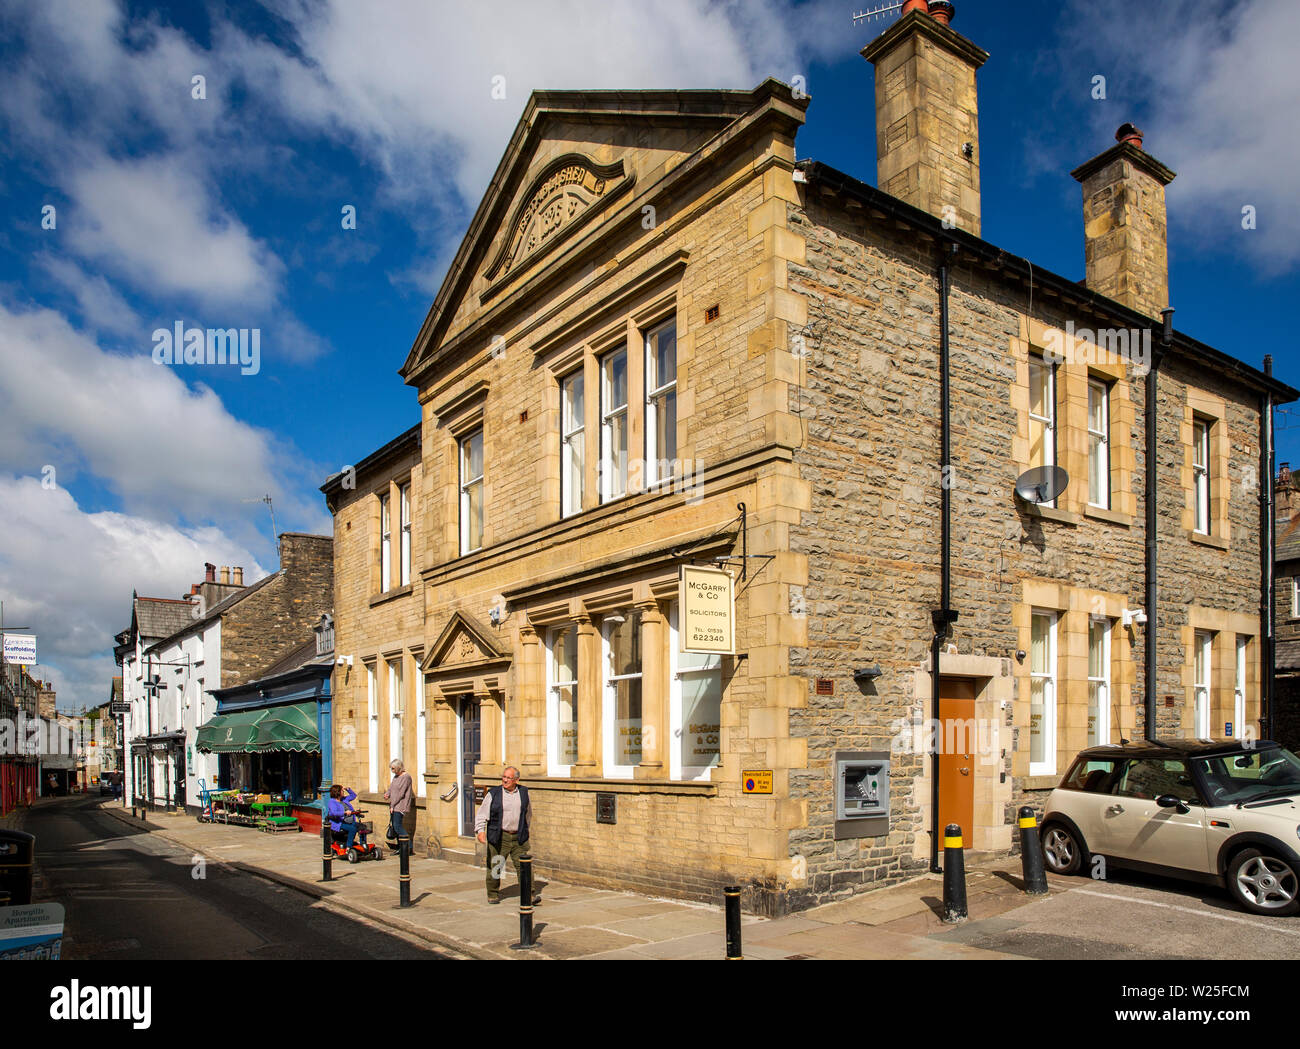 UK, Cumbria, Sedbergh, Main Street, solicitor’s office in former Bank Building Stock Photo